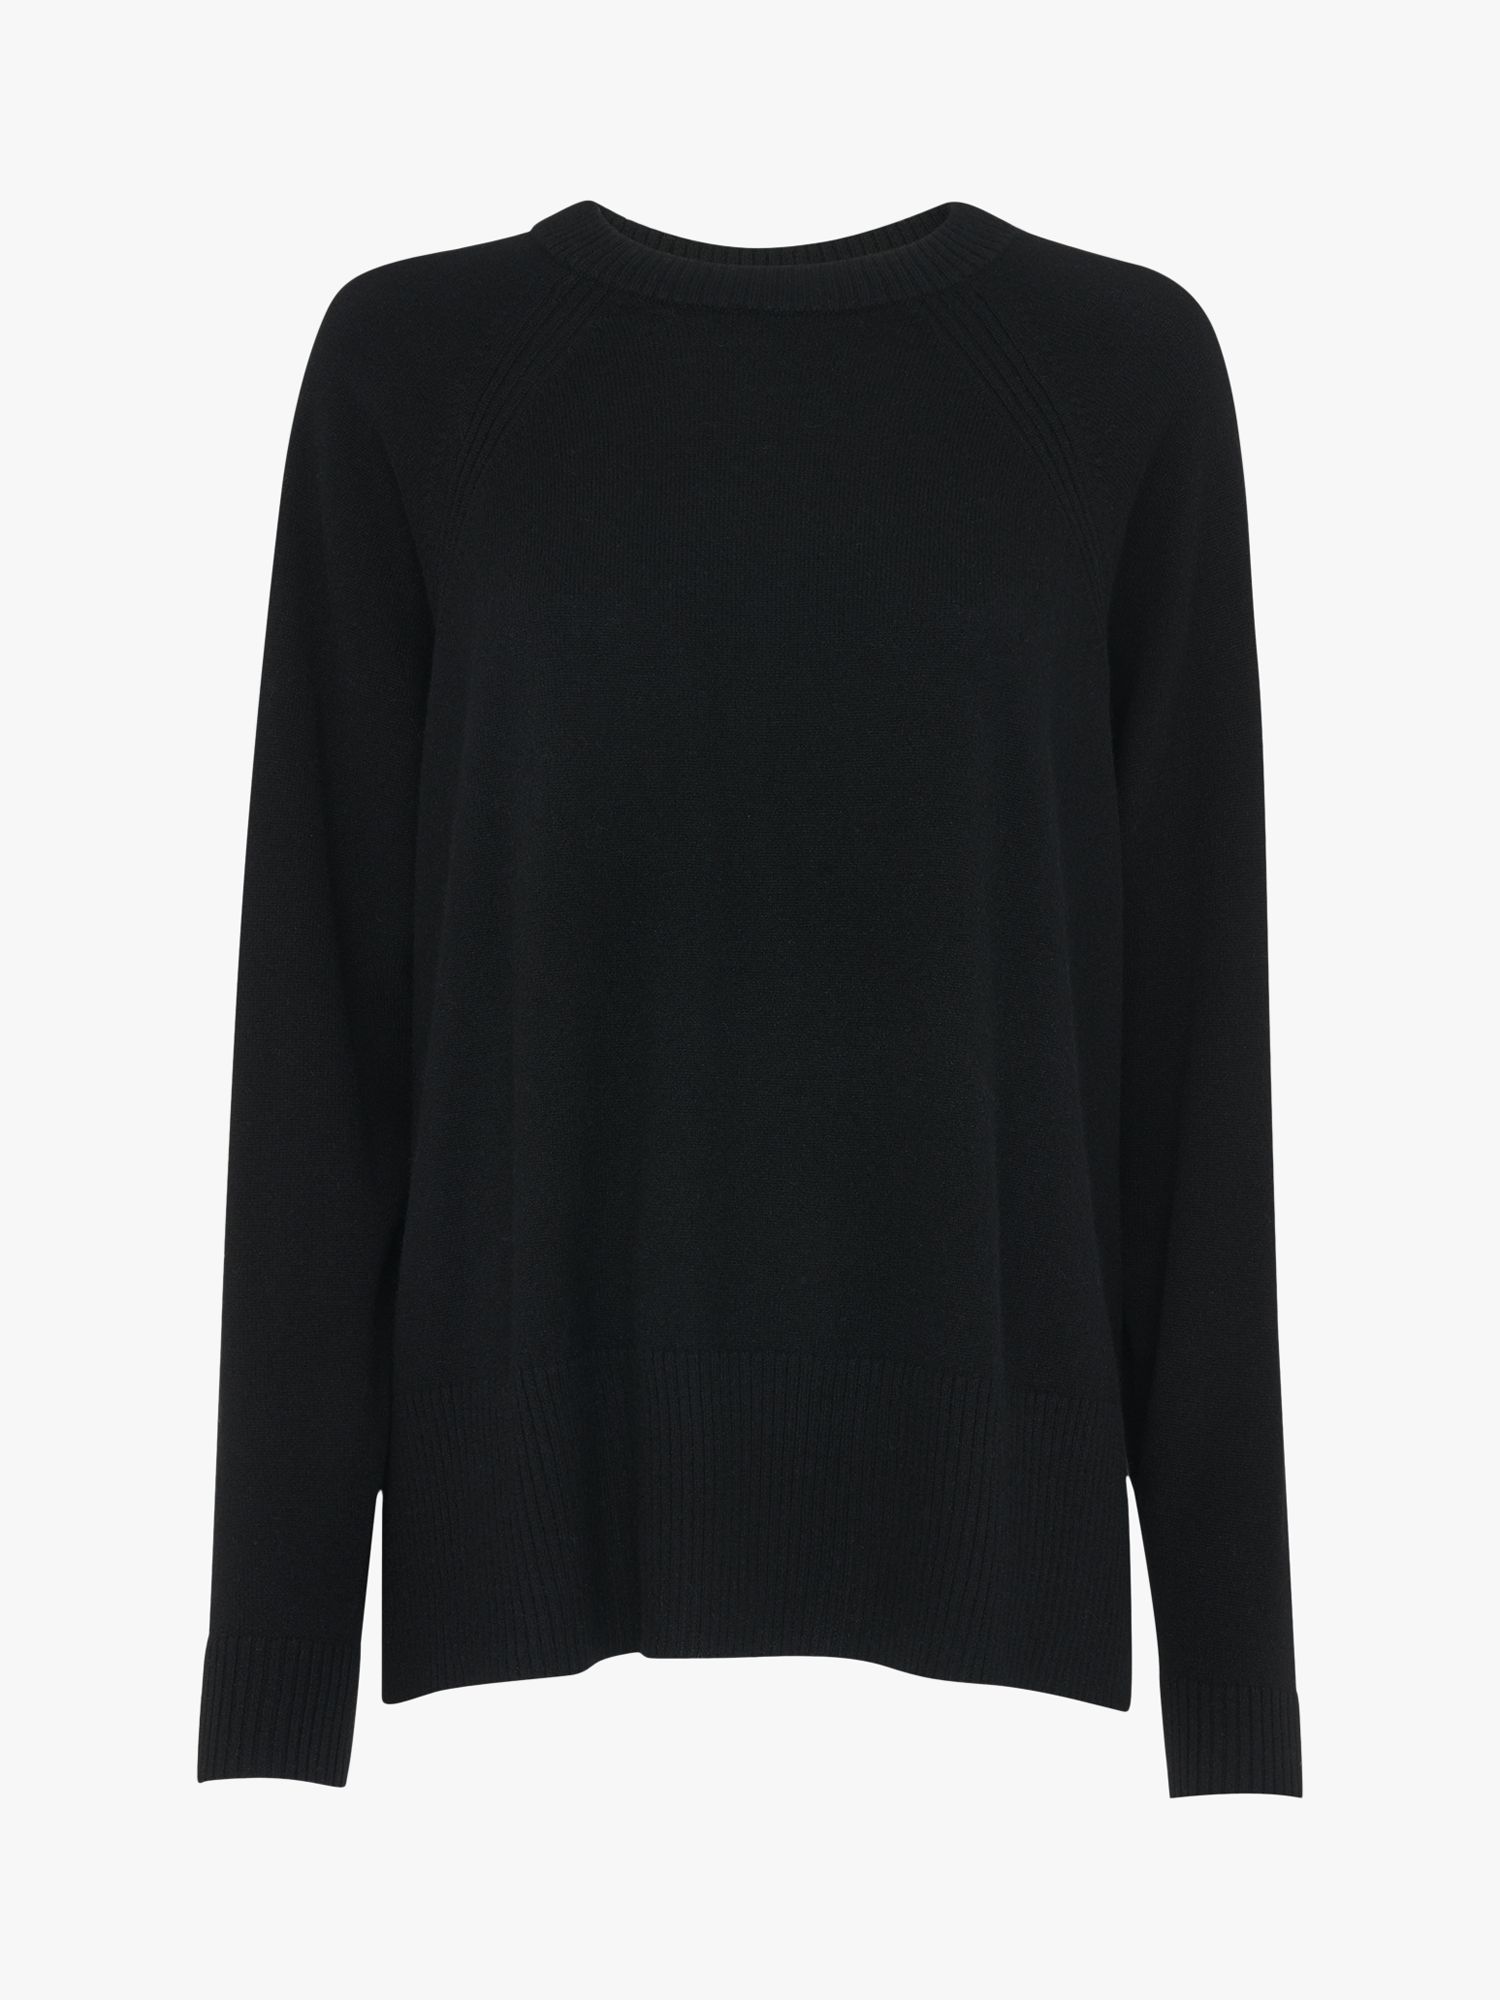 Whistles Ultimate Cashmere Jumper, Black, XS